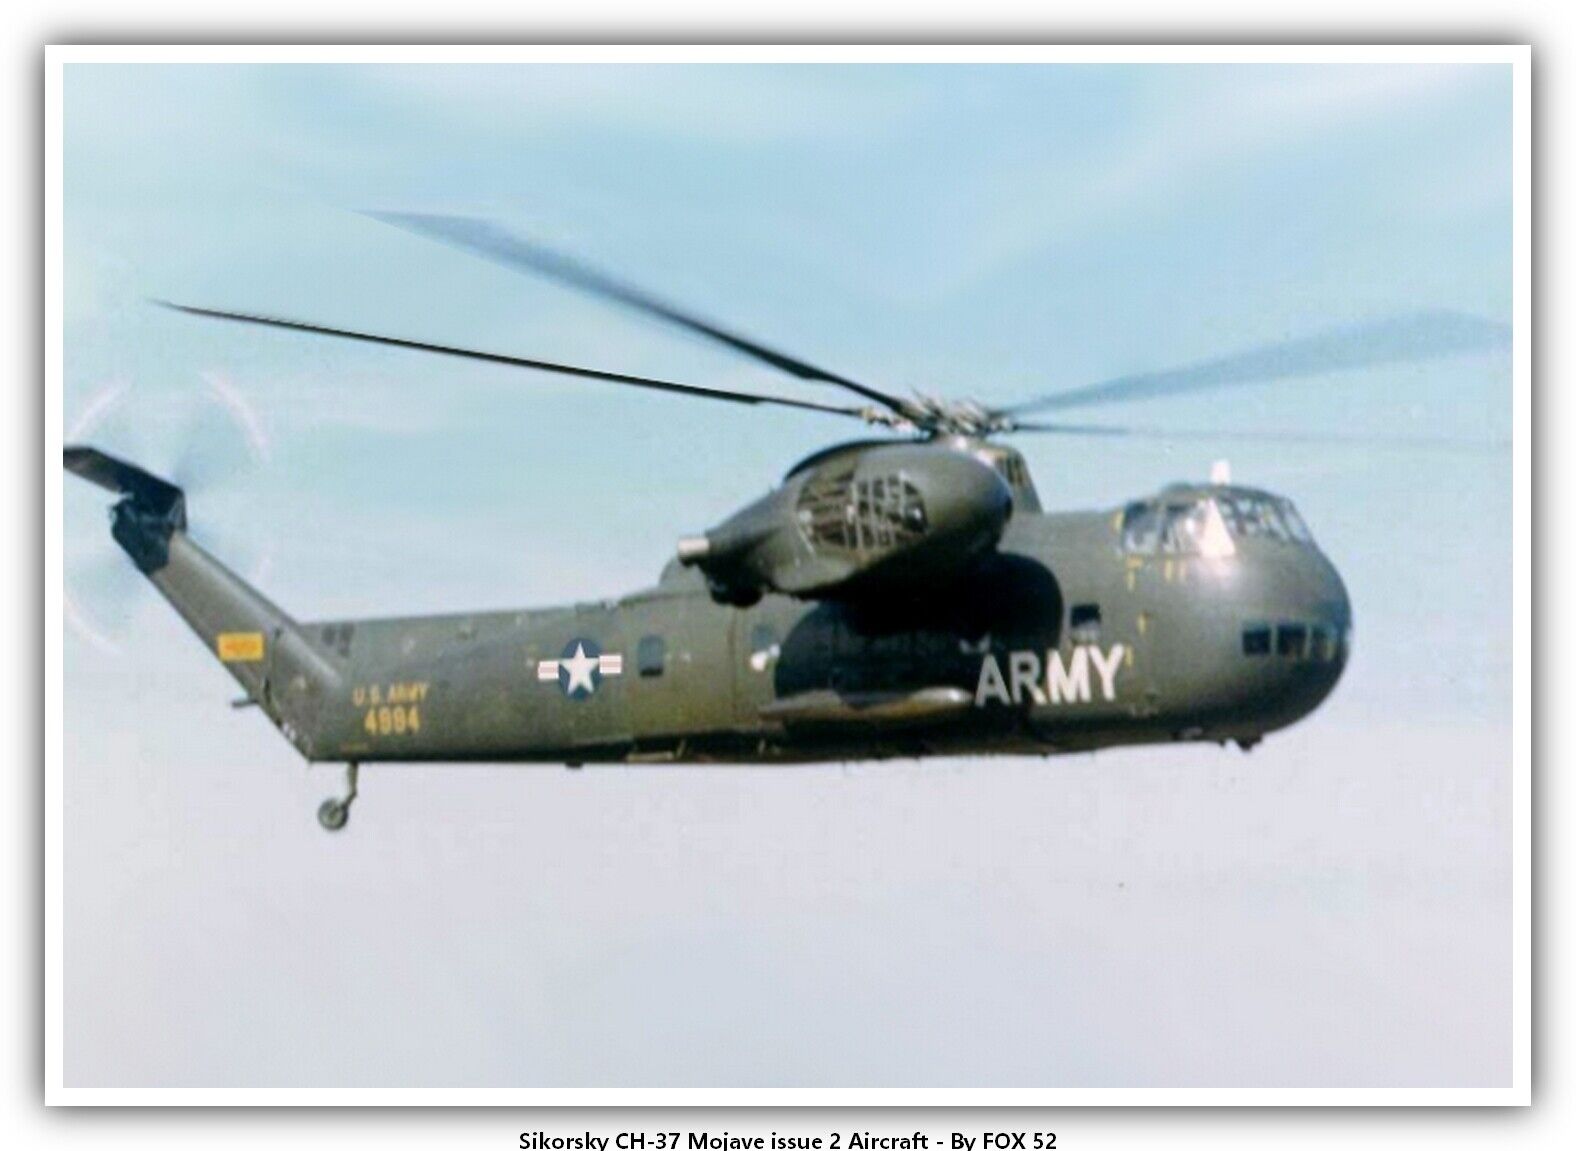 Sikorsky CH-37 Mojave issue 2 Aircraft